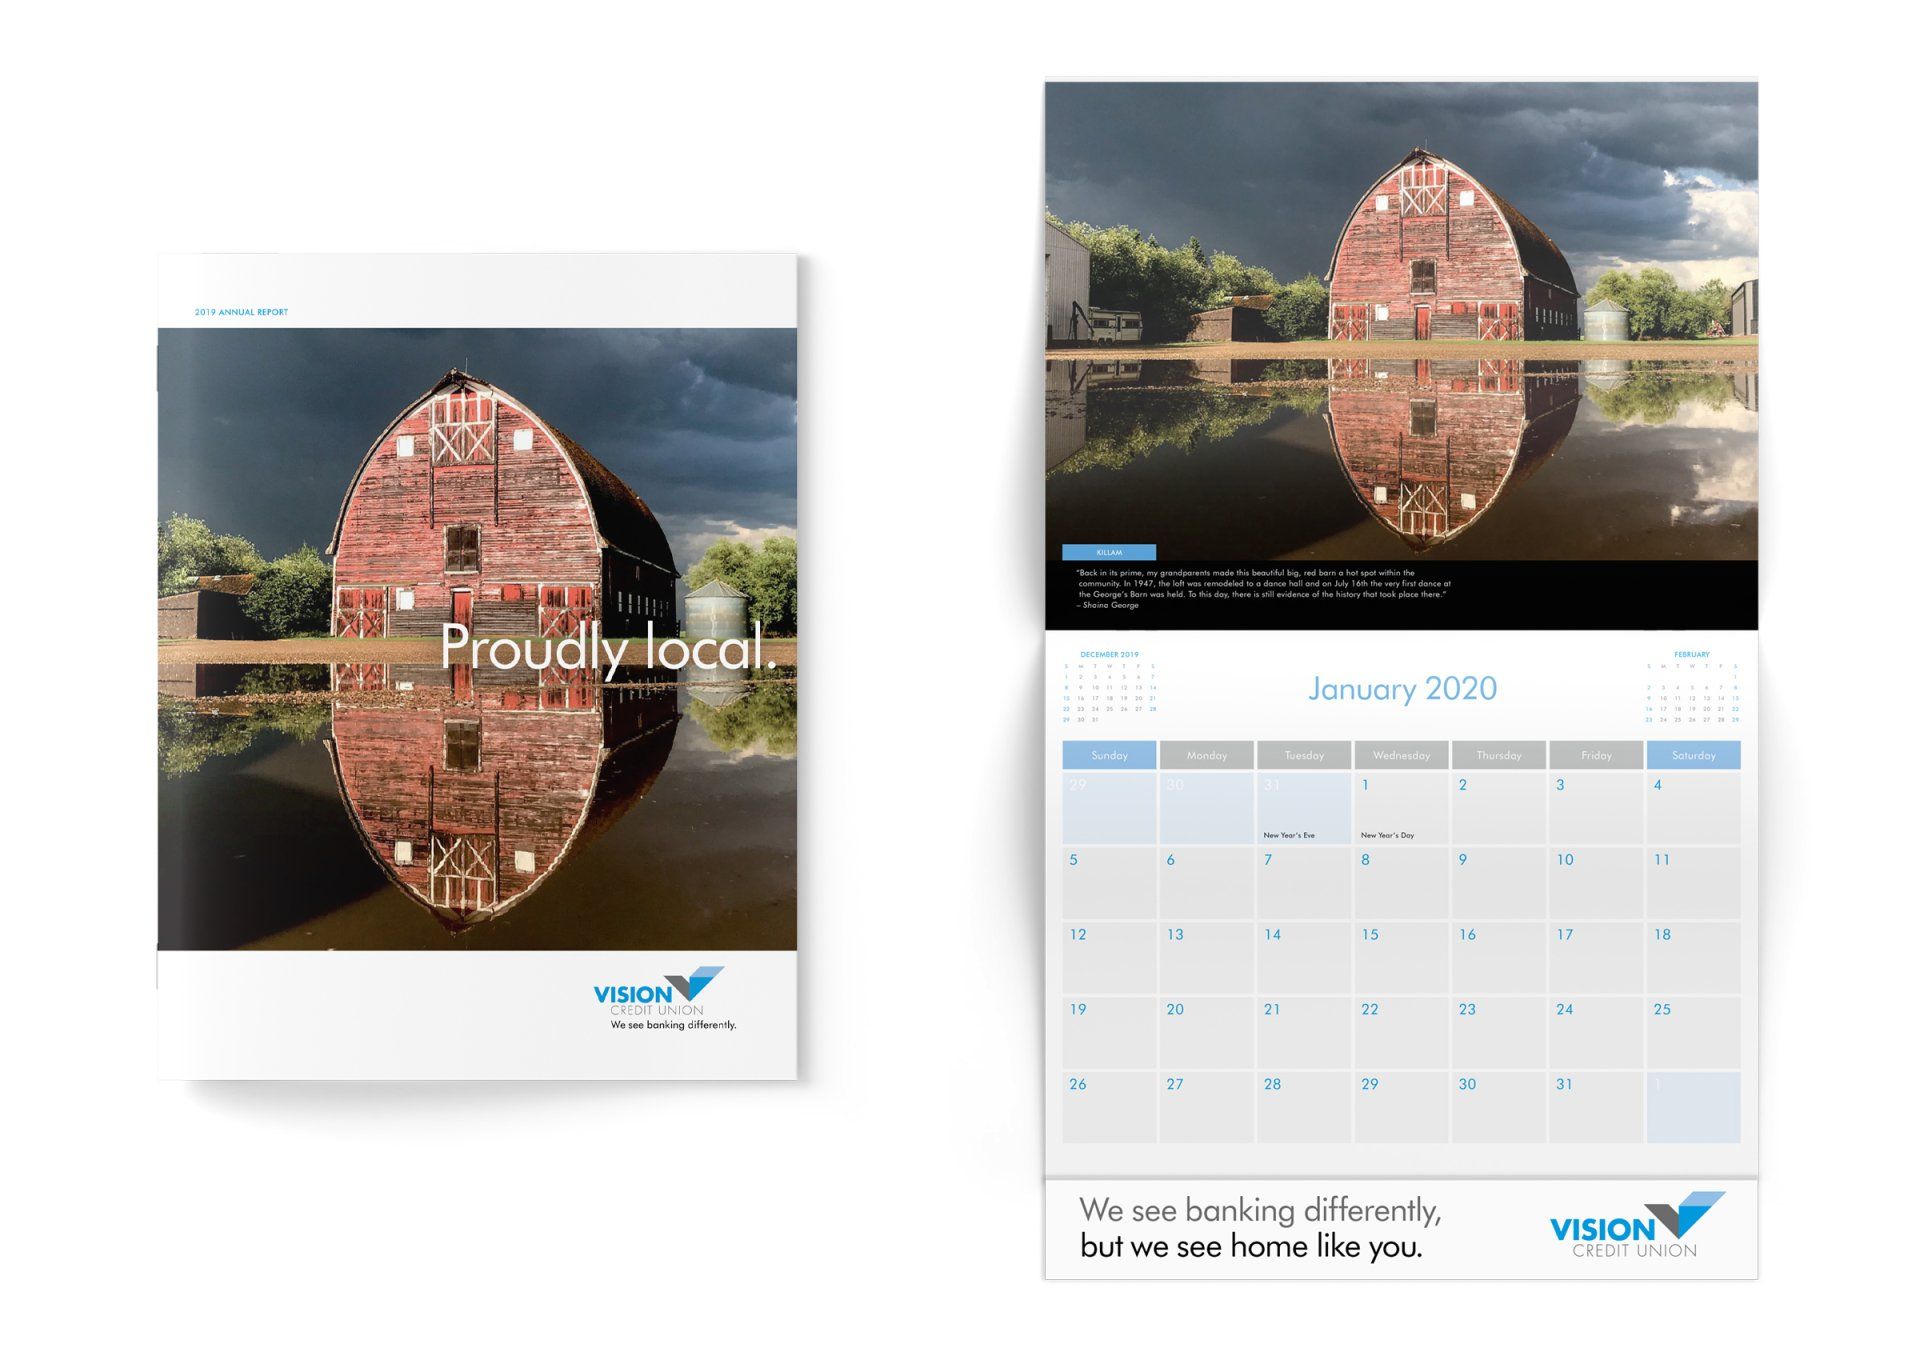 ANNUAL REPORT AND SPECIAL EDITION WALL CALENDAR FOR VISION CREDIT UNION DESIGNED BY IVY DESIGN INC